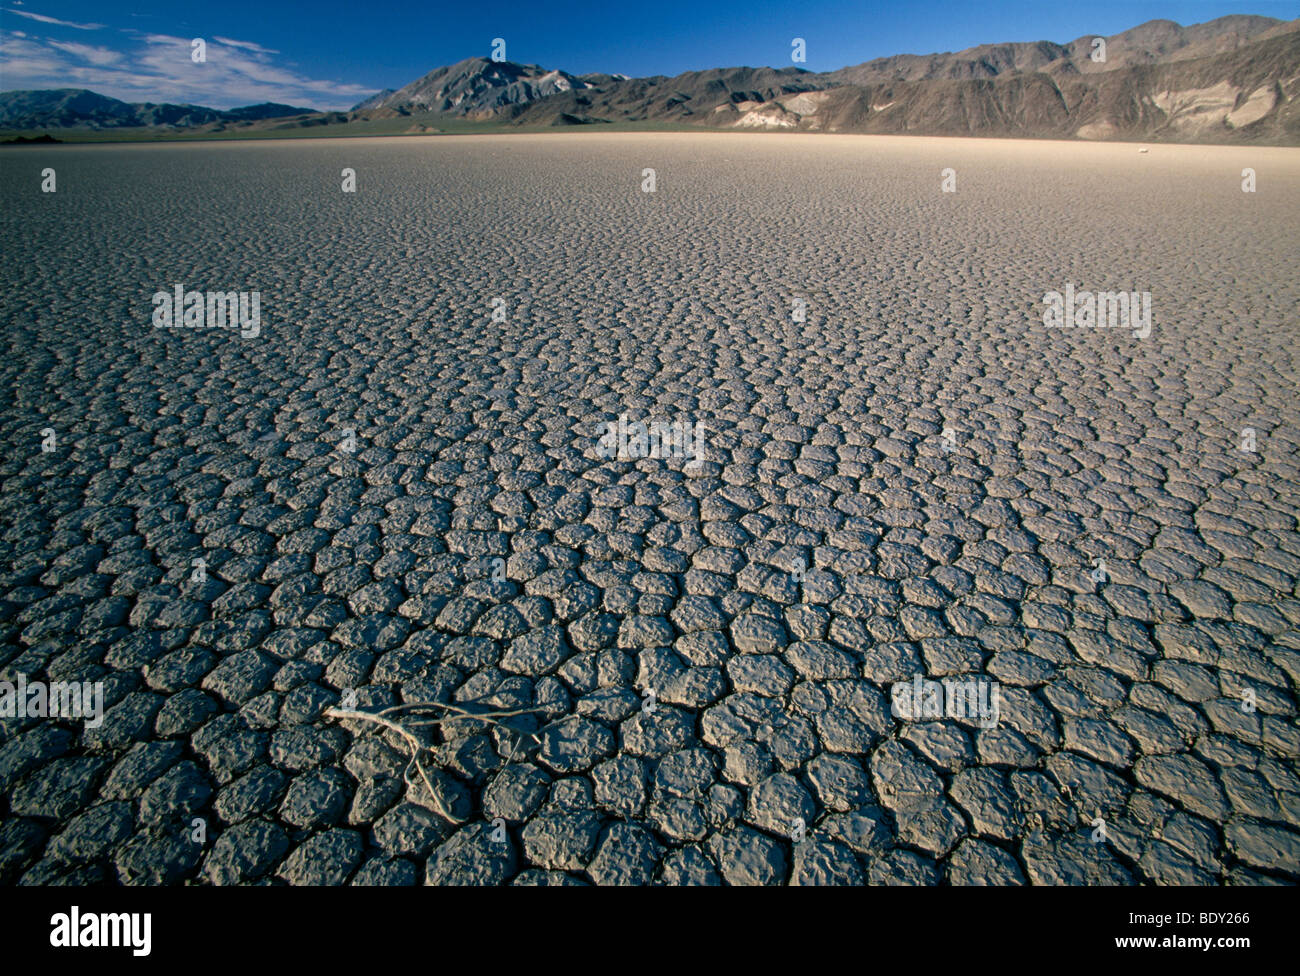 Dried-out bed of a former lake, Racetrack, The Playa, Death Valley National Park, Lone Pine, California, USA Stock Photo